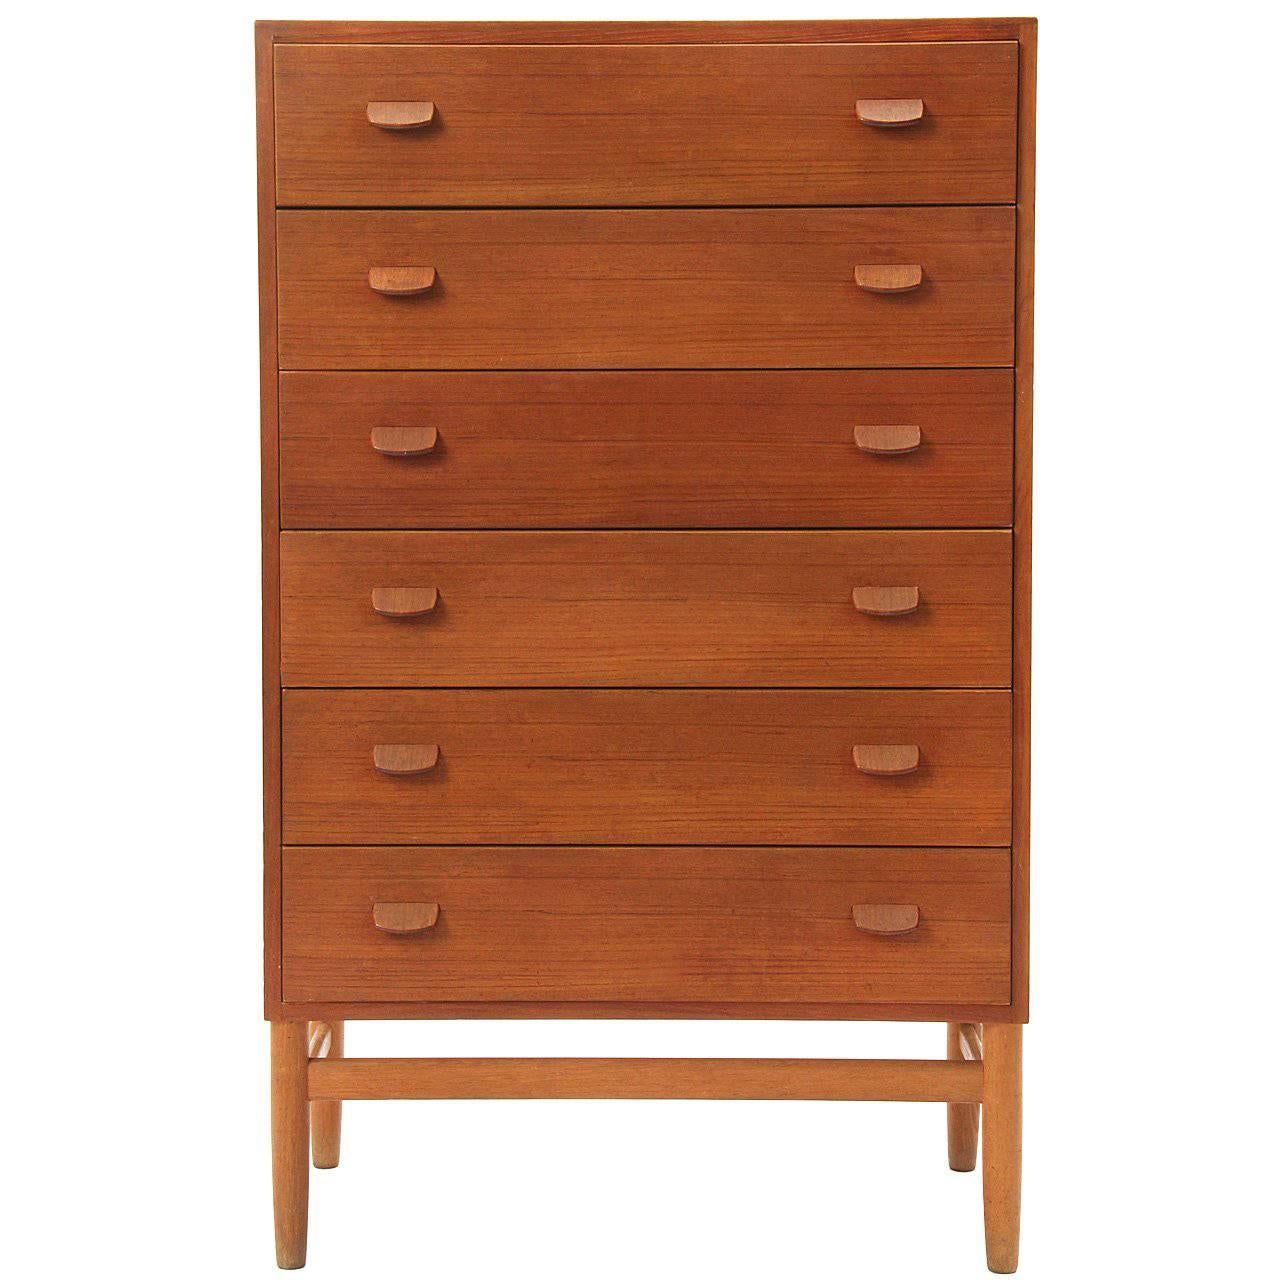 Six-Drawer Dresser by Paul Volther